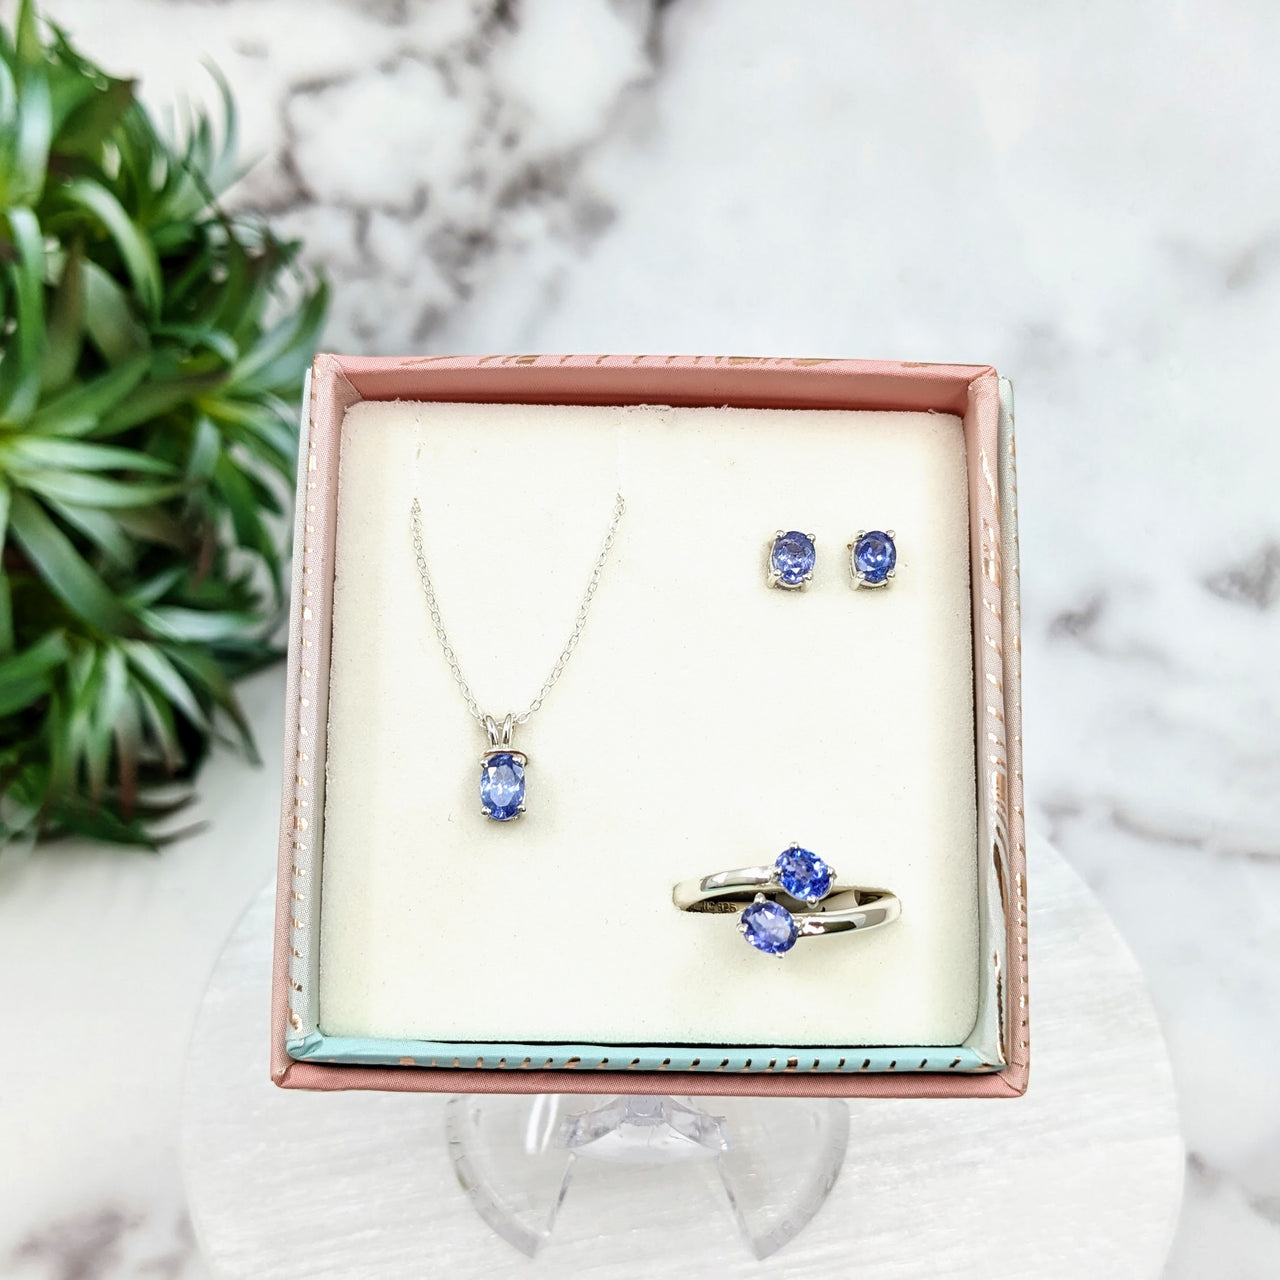 Tanzanite Faceted Jewelry 3 pc Box Set Sterling Silver Earrings, Pendant, Adjustable Ring #LV3231